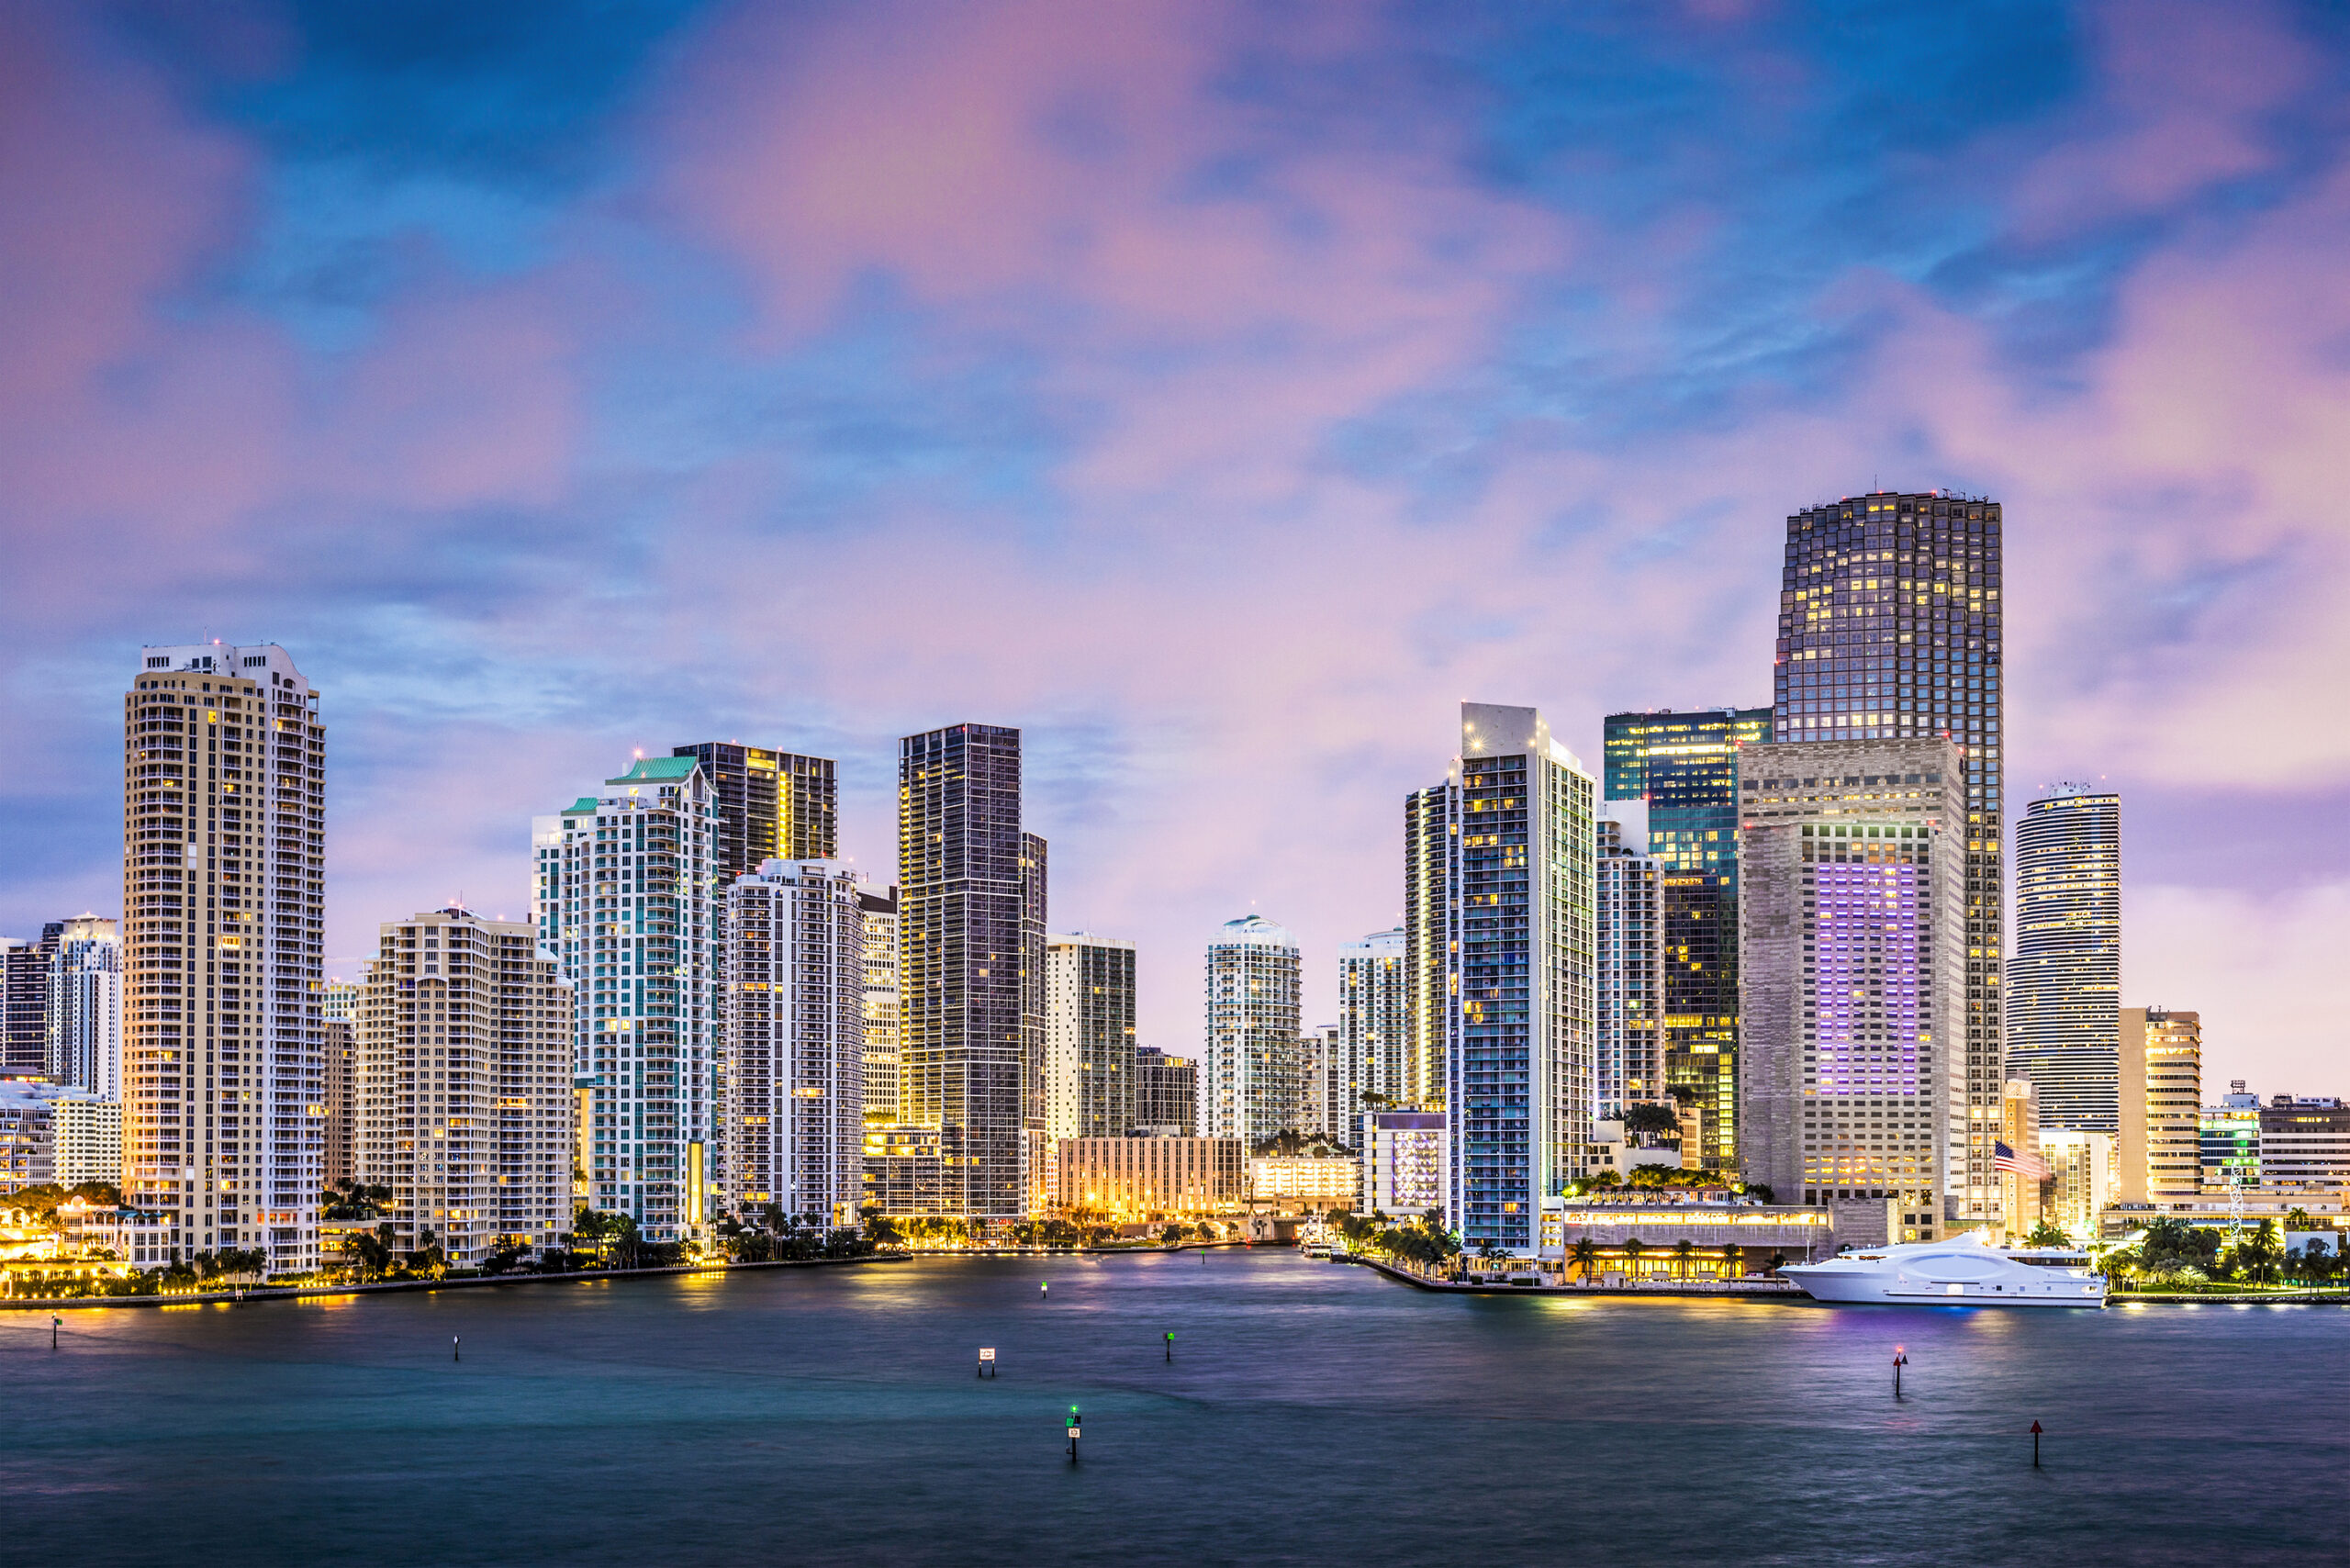 Miami Retains Its Title as the Most Competitive Apartment Market in the U.S.